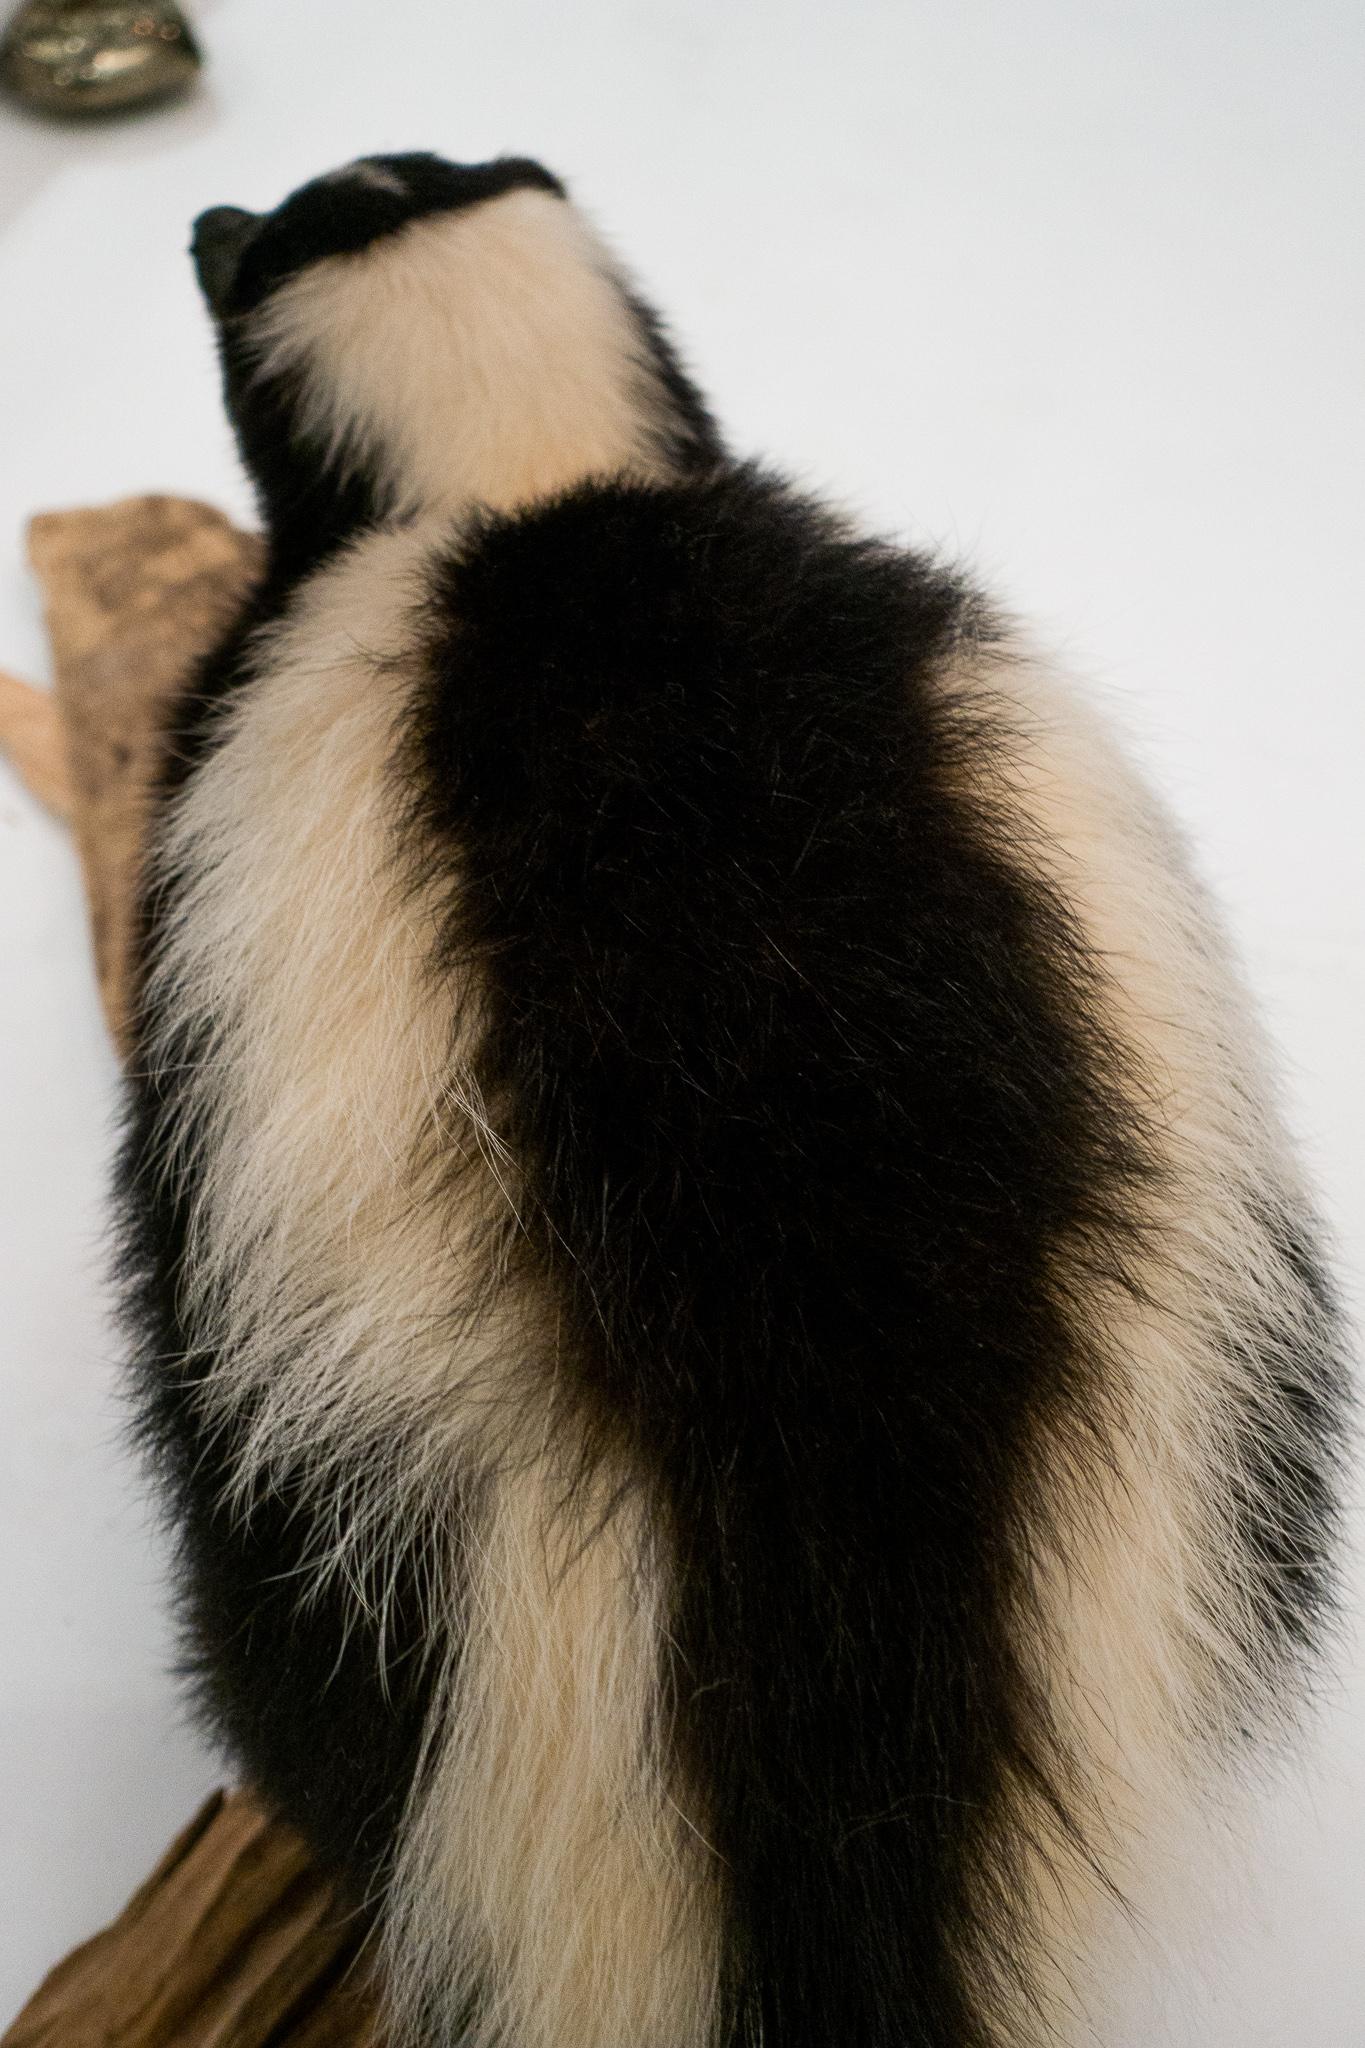 American Taxidermied Skunk Mounted on a Naturalistic Wood Base